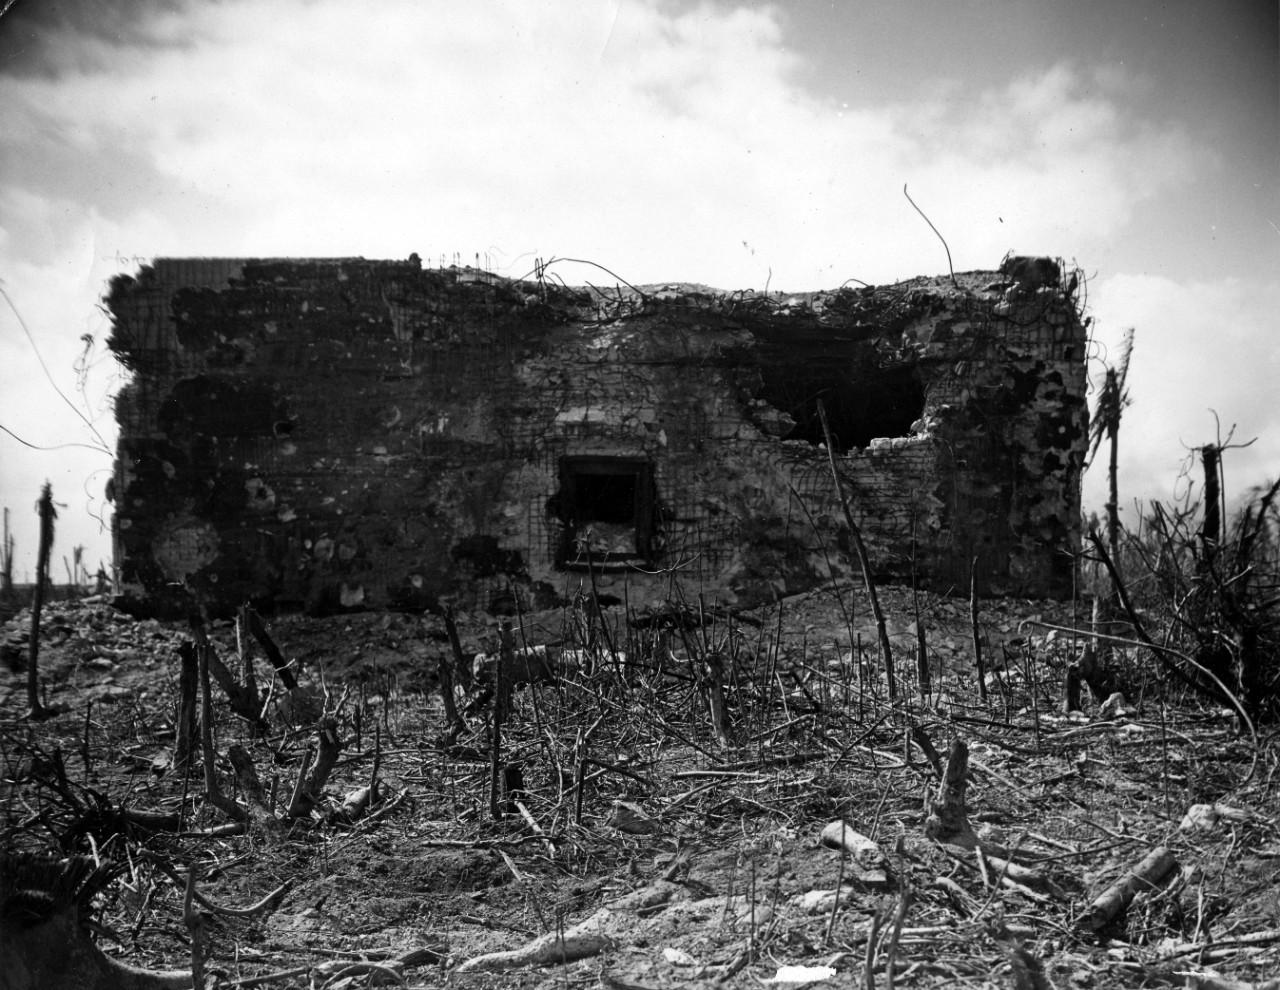 S-065 Roi-Namur Damage Photos Collection 63 images of naval bombardment damage photos on Roi-Namur Island, Kwajalein Atoll, Marshall Islands, 29 January 1944 – 2 February 1944, following Allied invasion. Photos were transferred from Operational Archives, with no indication as to their original source.